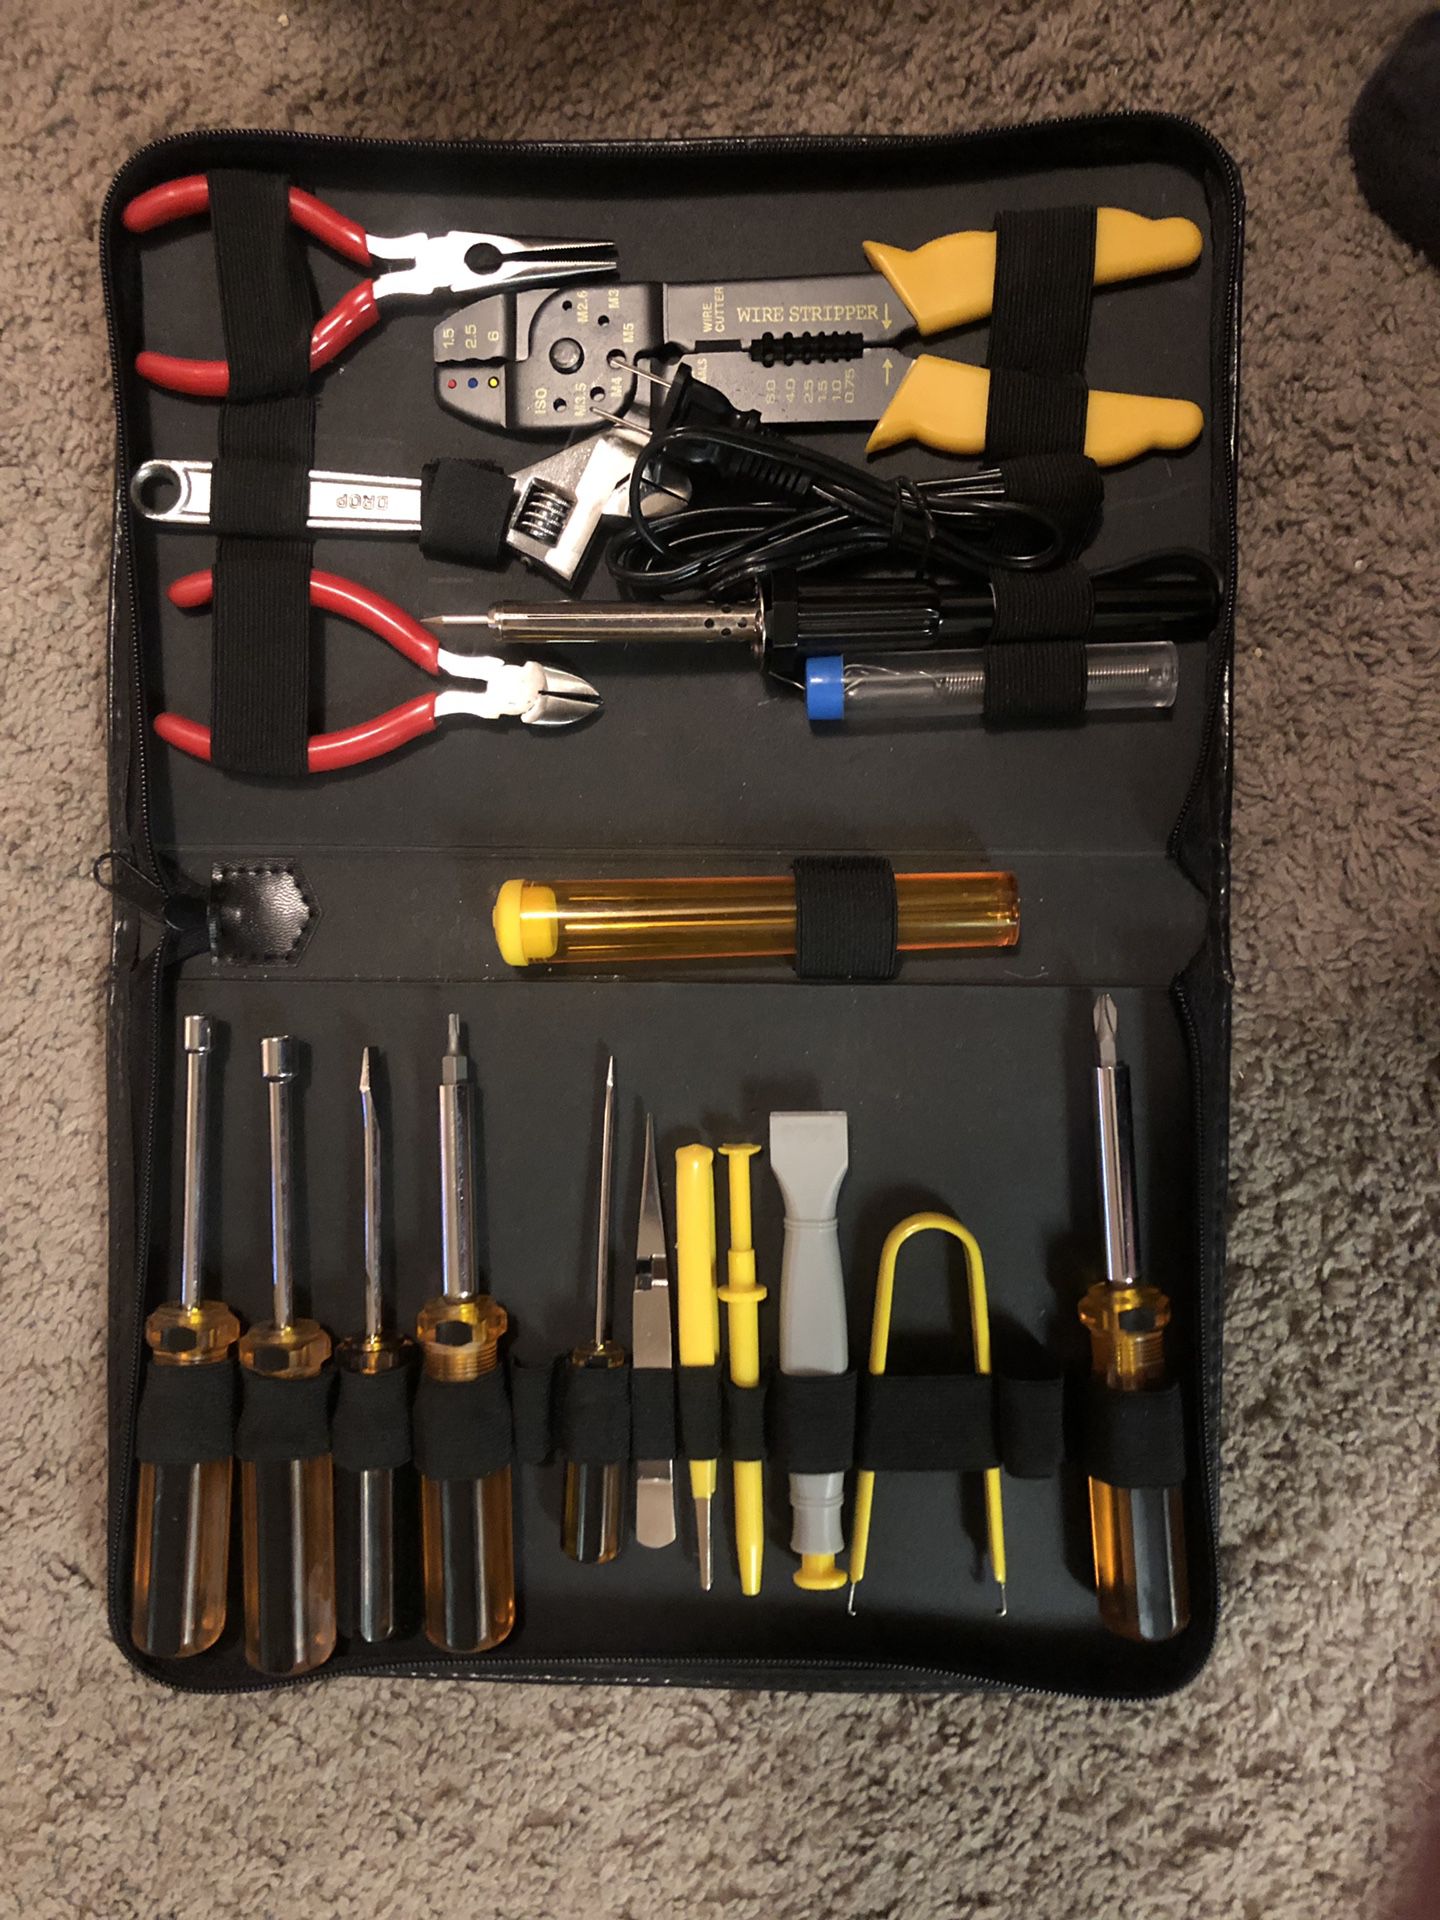 Electronics Repair Tool Set, With Soldering Iron and Carrying Case, Never Used. We Can Meet At New Dunkin Donuts 802 Conowingo Road Bel Air, MD 21014